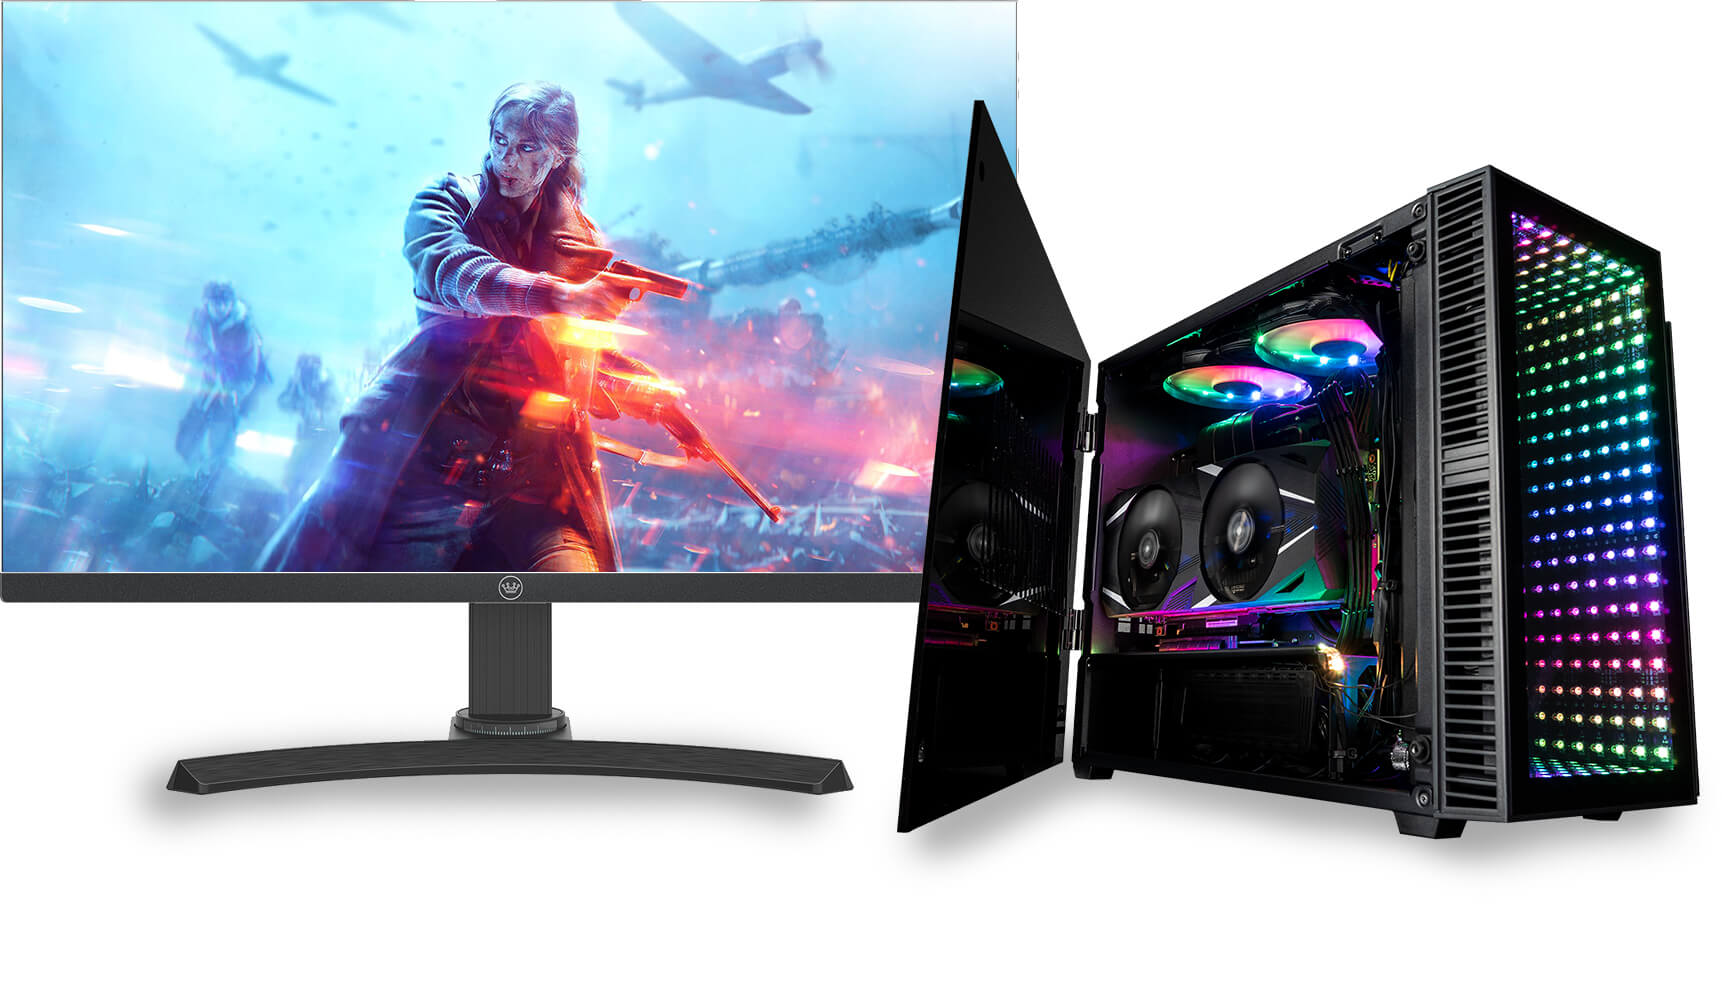 Bundle the Continuum Mini with a CUK QHD Monitor